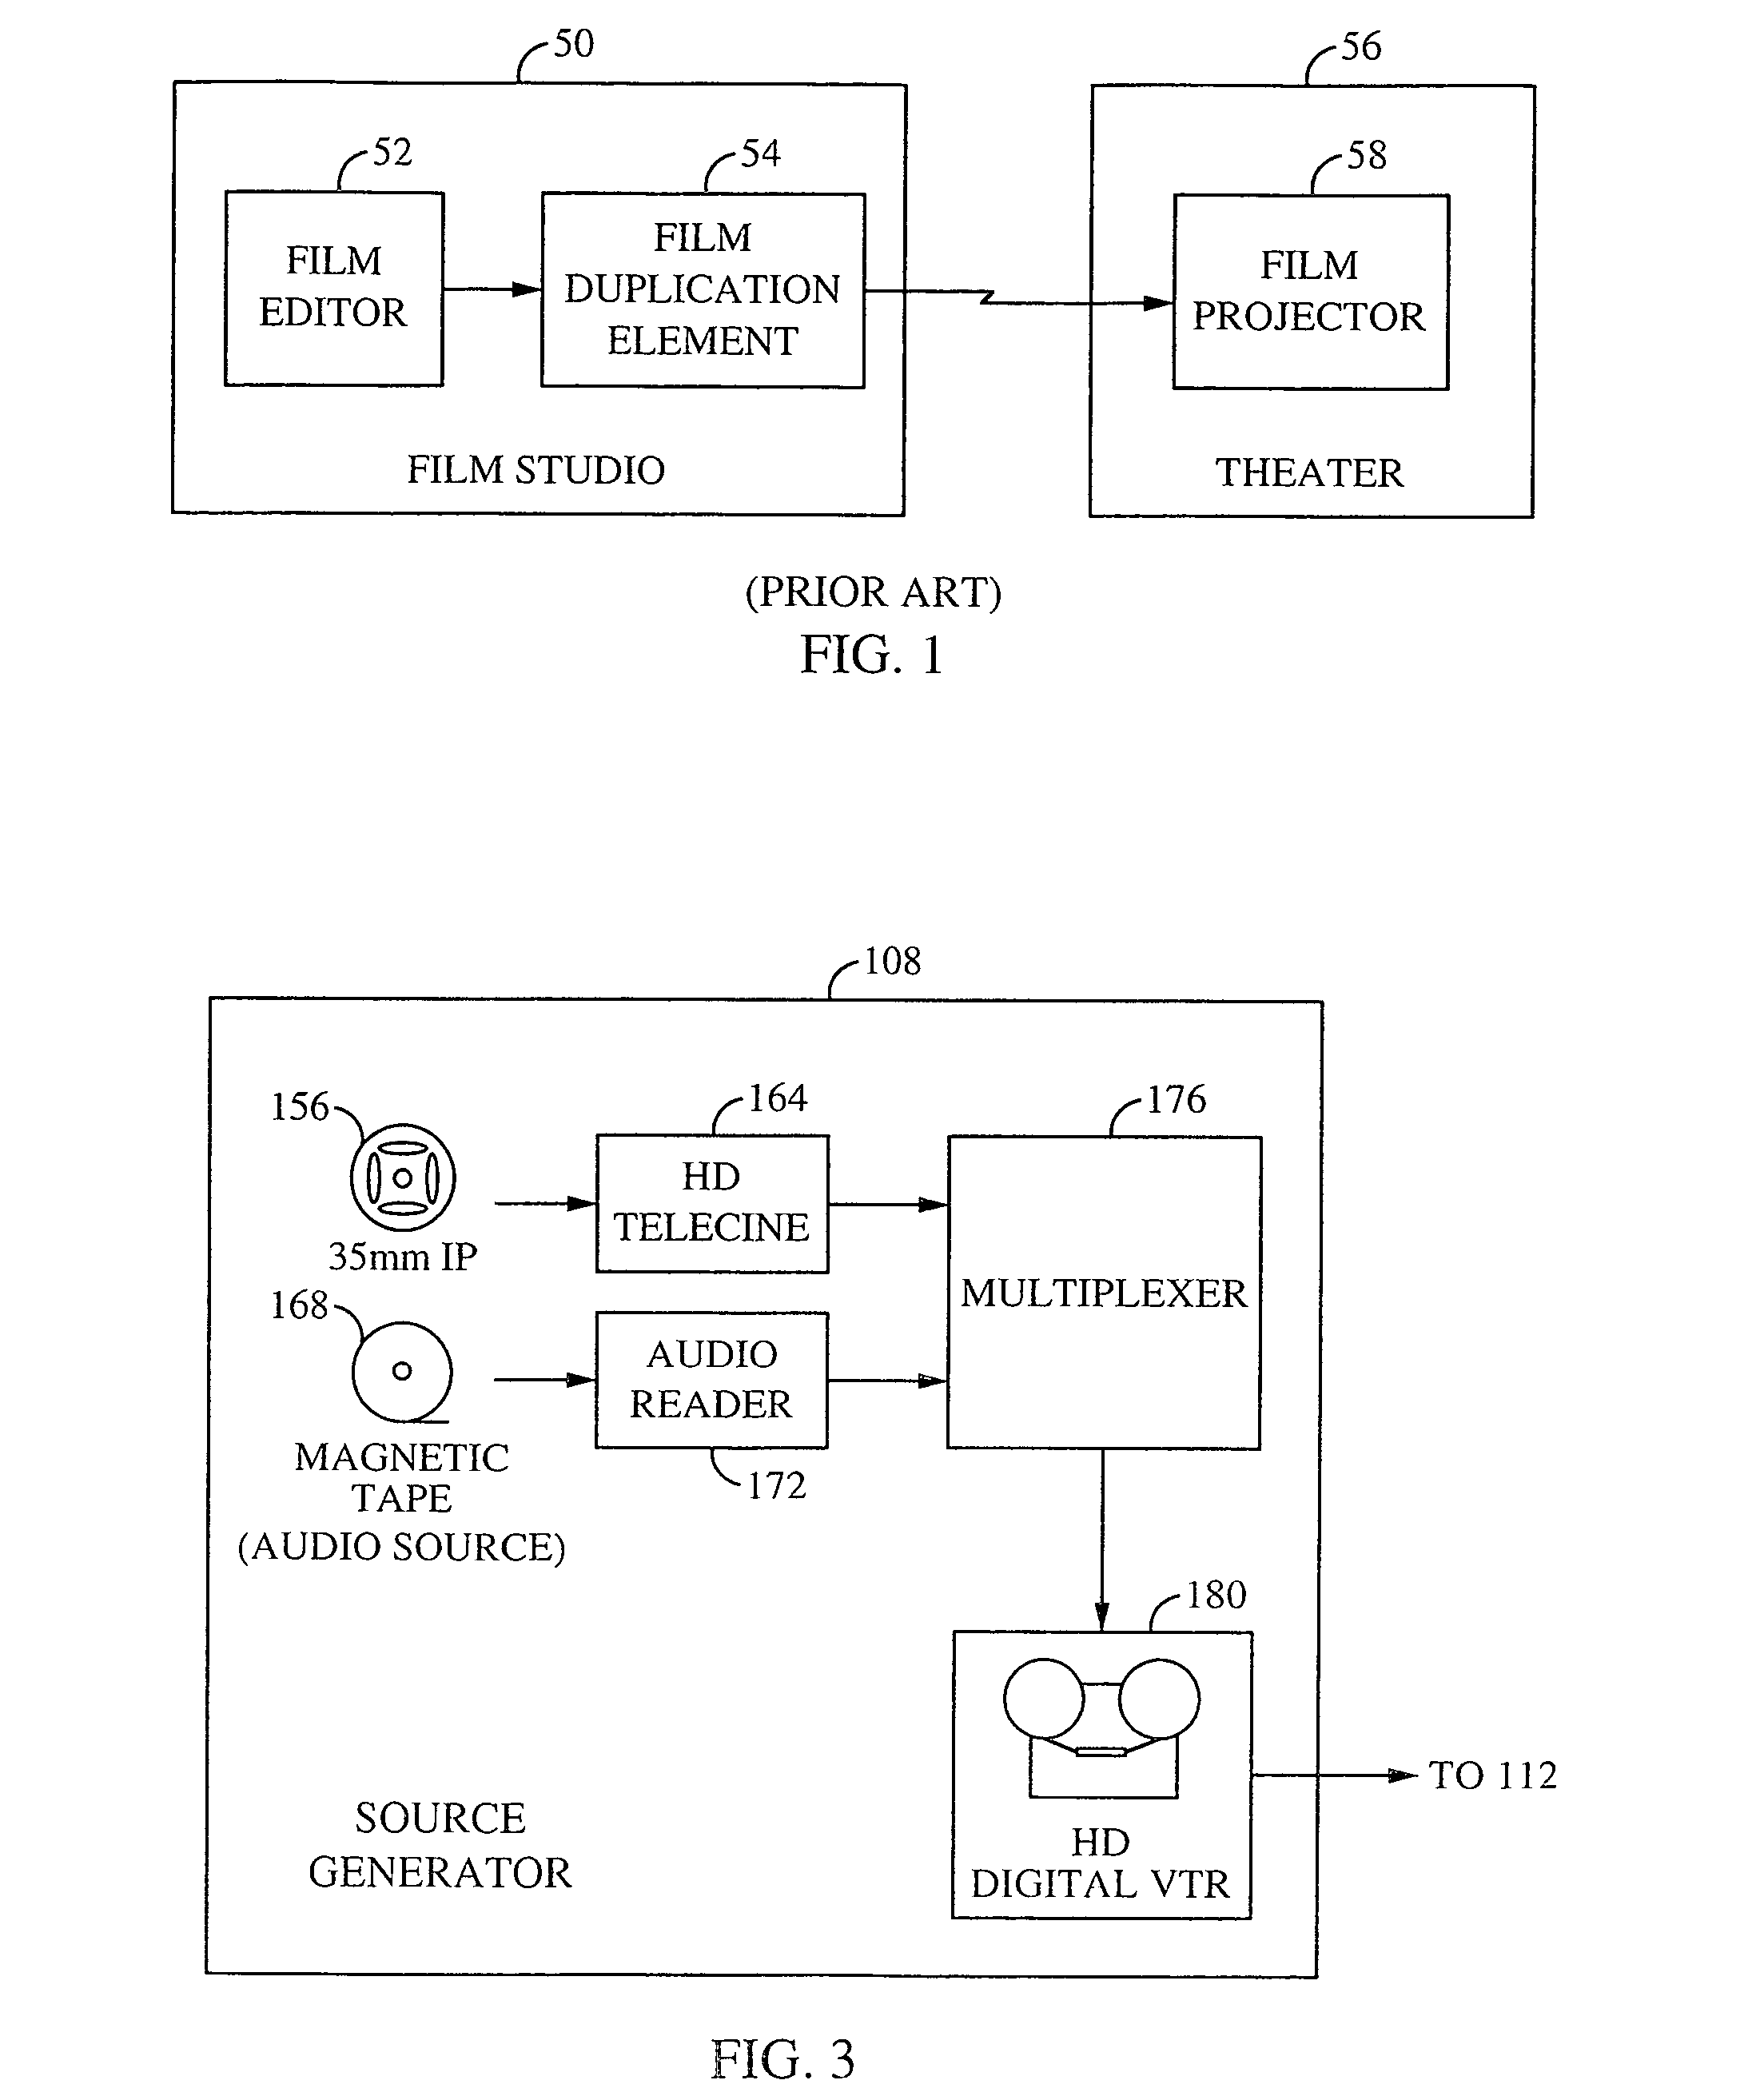 Apparatus and method for encoding and storage of digital image and audio signals